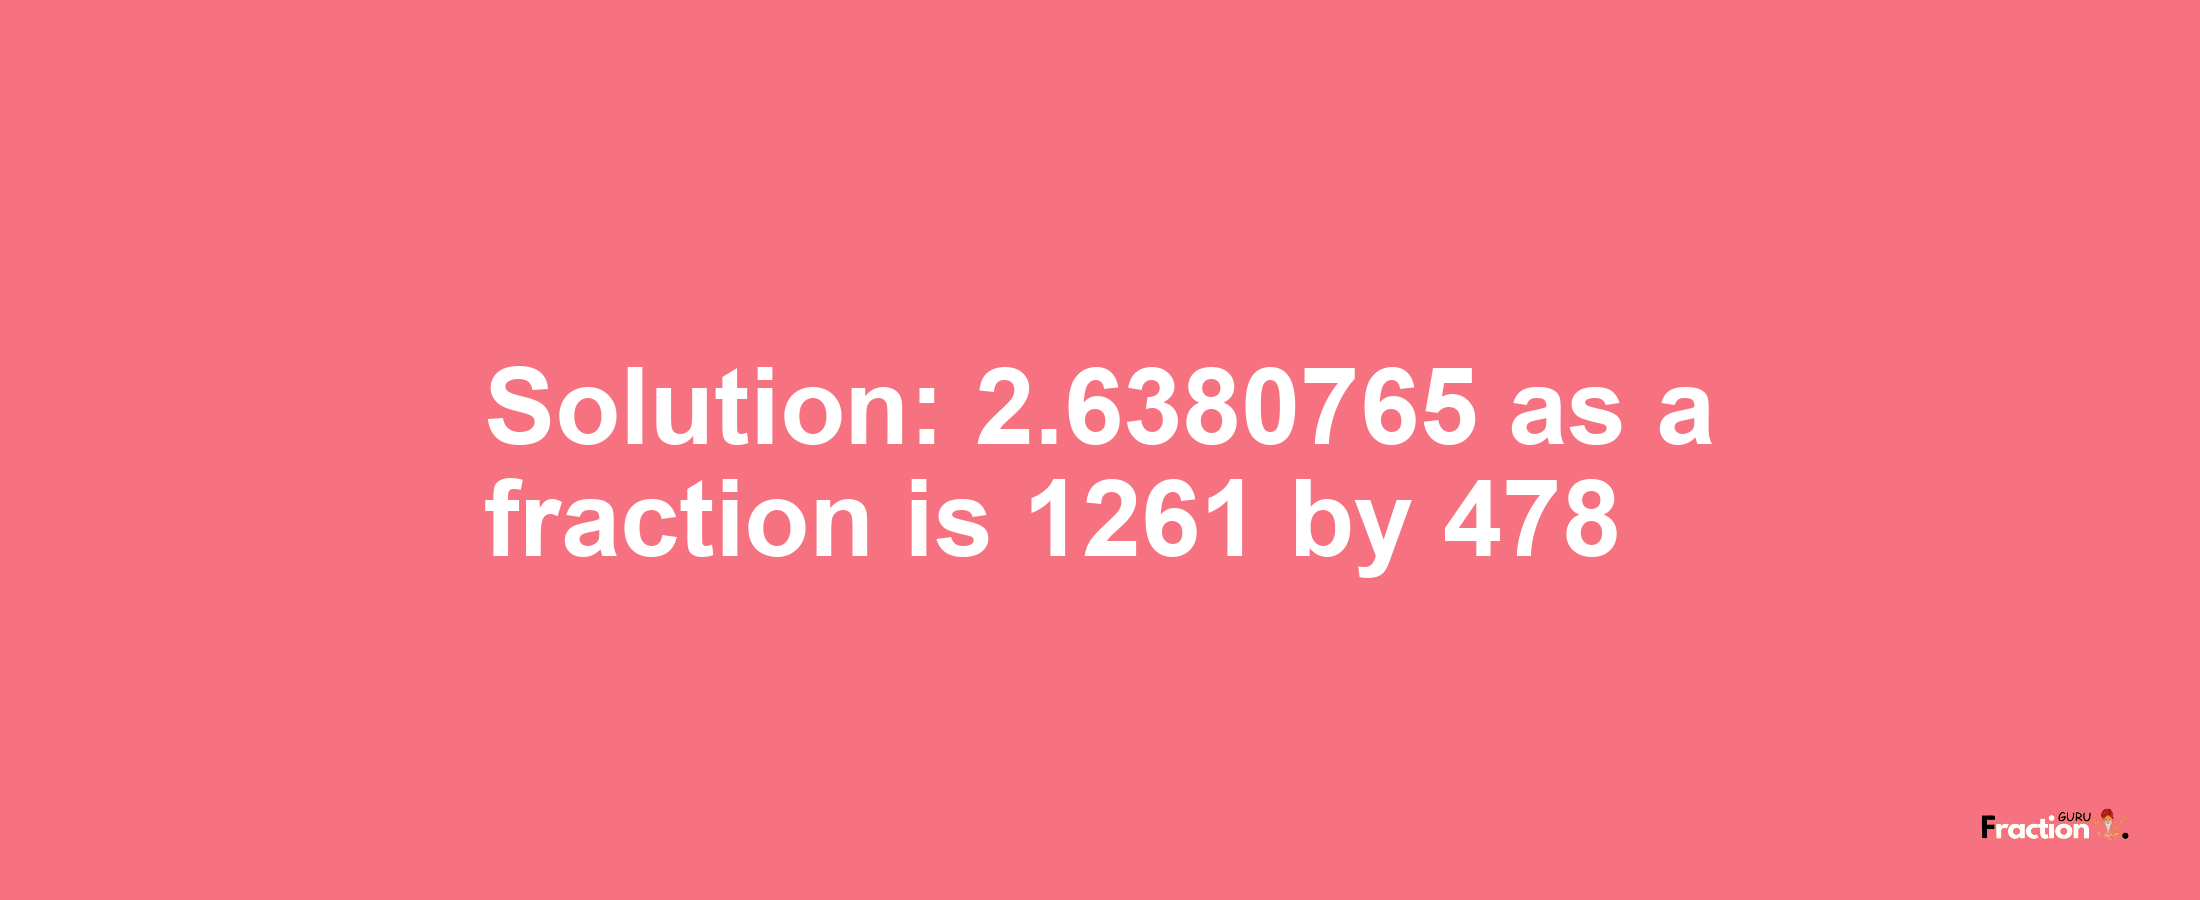 Solution:2.6380765 as a fraction is 1261/478